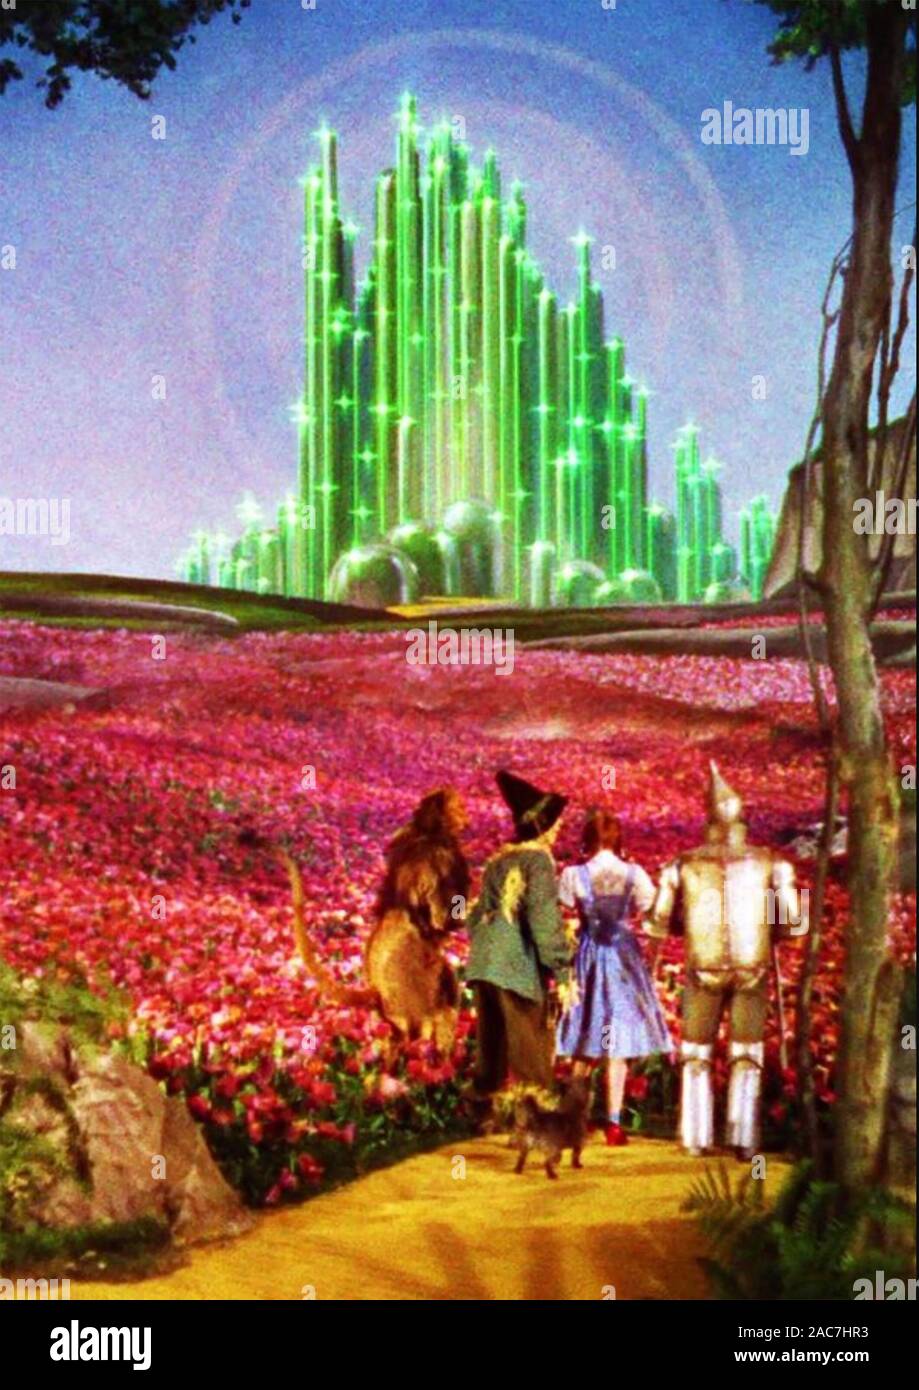 THE WIZARD OF OZ 1939 MGM film with Judy Garland. Arriving at the Emerald City. Stock Photo